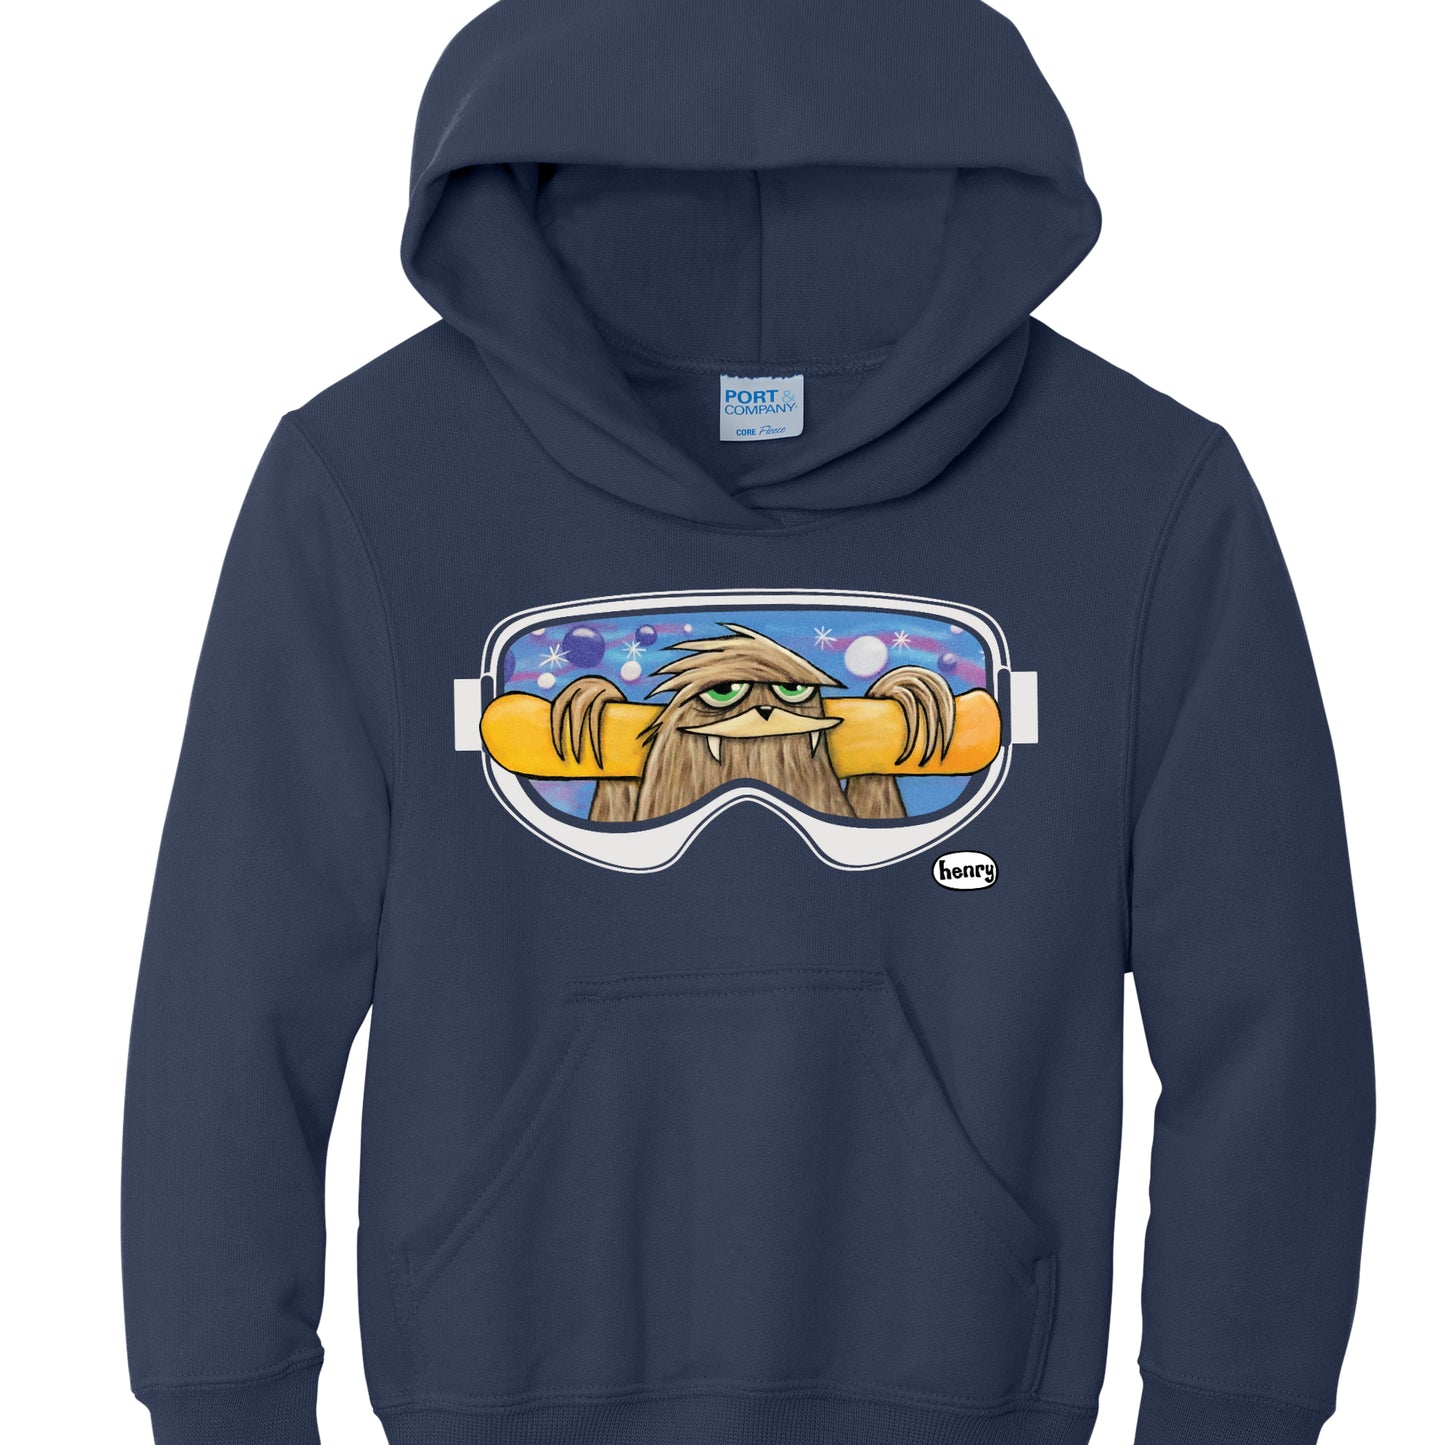 Sasquatch with Snowboard Navy Youth Hoodie | Wearable Art by Seattle Mural Artist Ryan "Henry" Ward